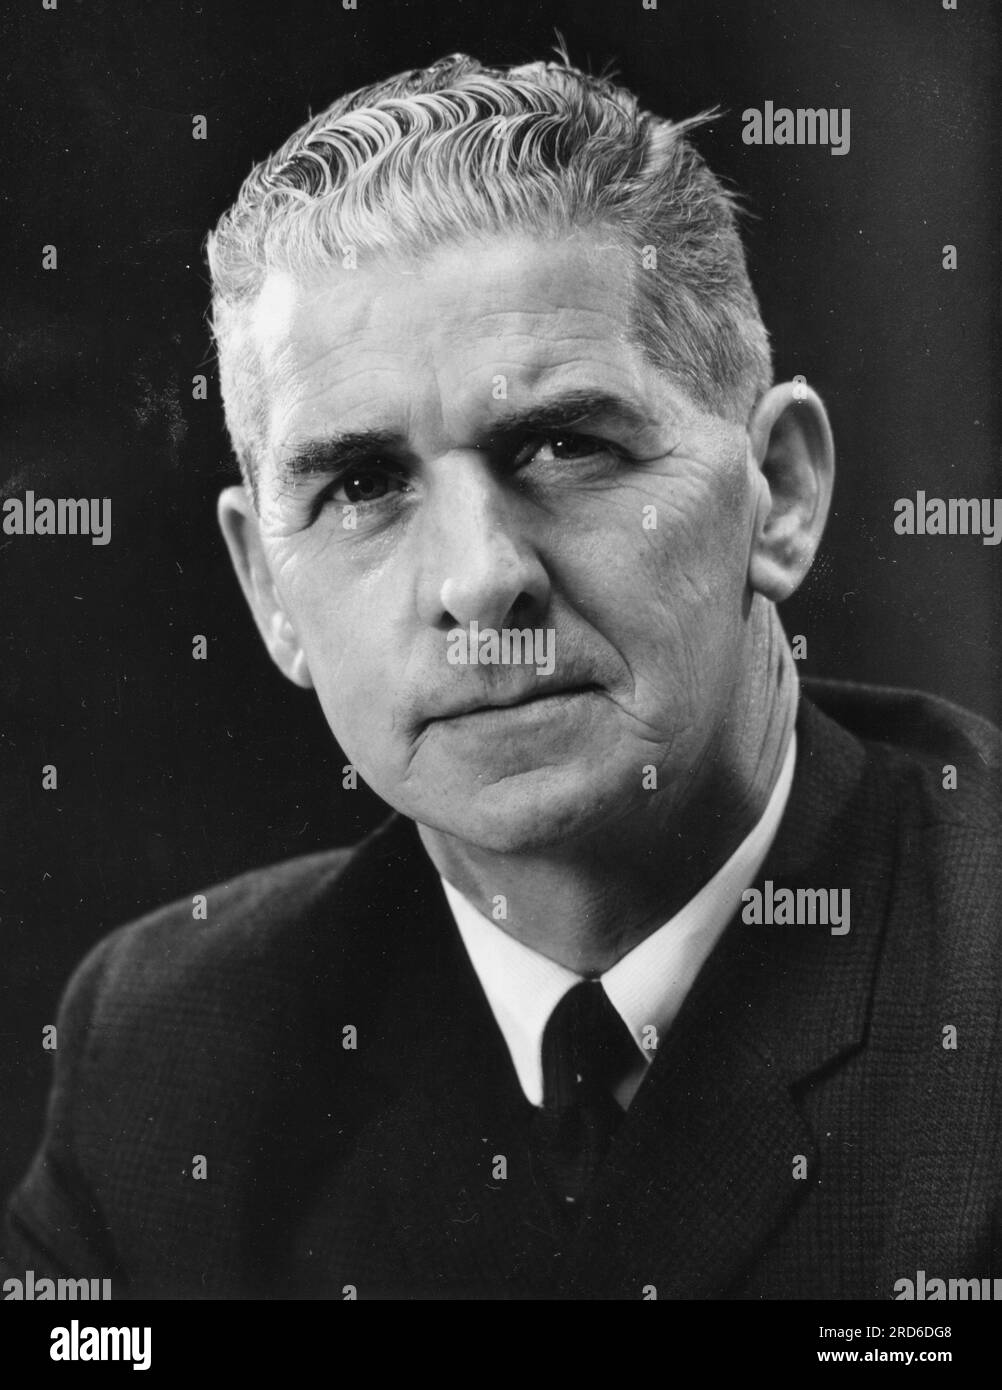 Wilson, Alexander, 5.6.1917 - 23.3.1978, Scottish politician (Labour), ADDITIONAL-RIGHTS-CLEARANCE-INFO-NOT-AVAILABLE Stock Photo